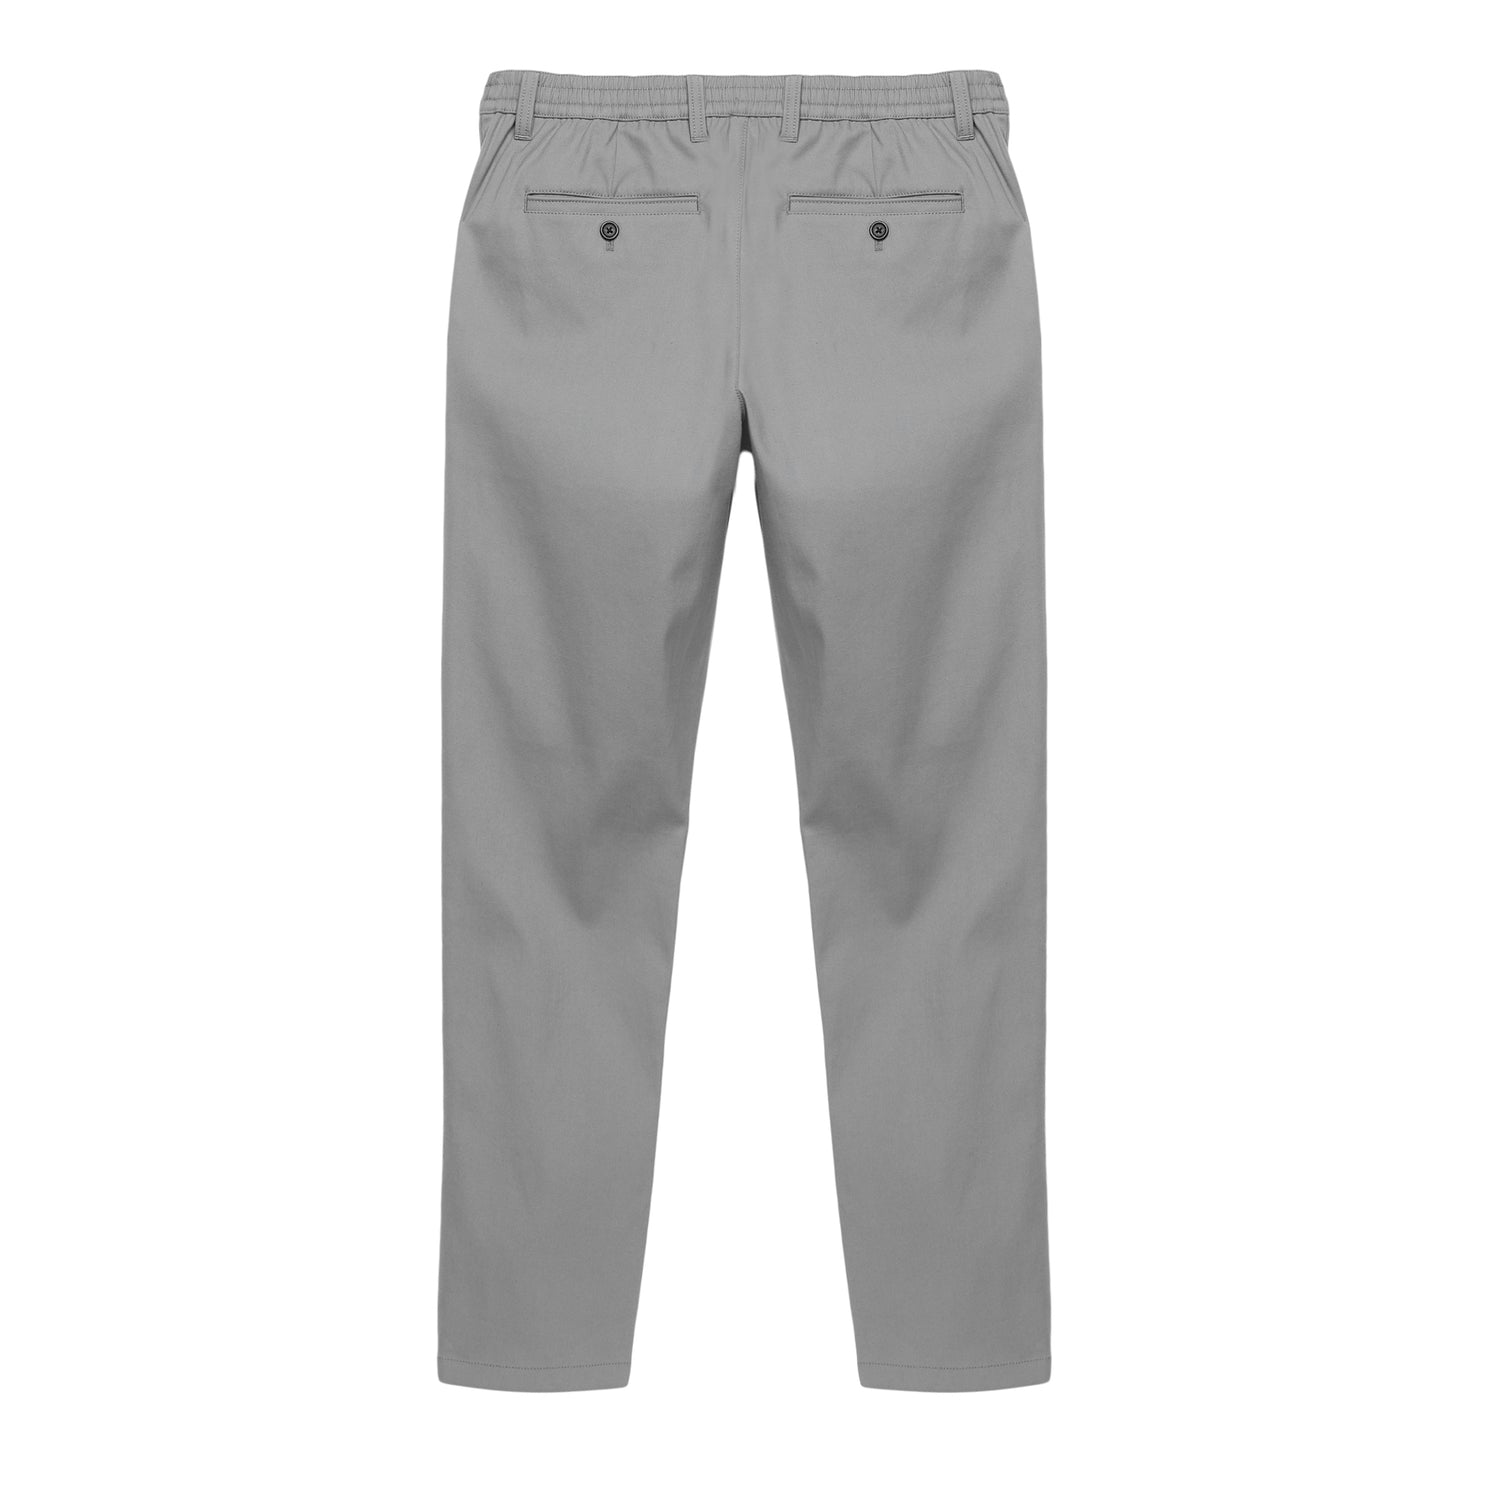 Slim Fit Elasticized Crossover Chinos - Frost Grey